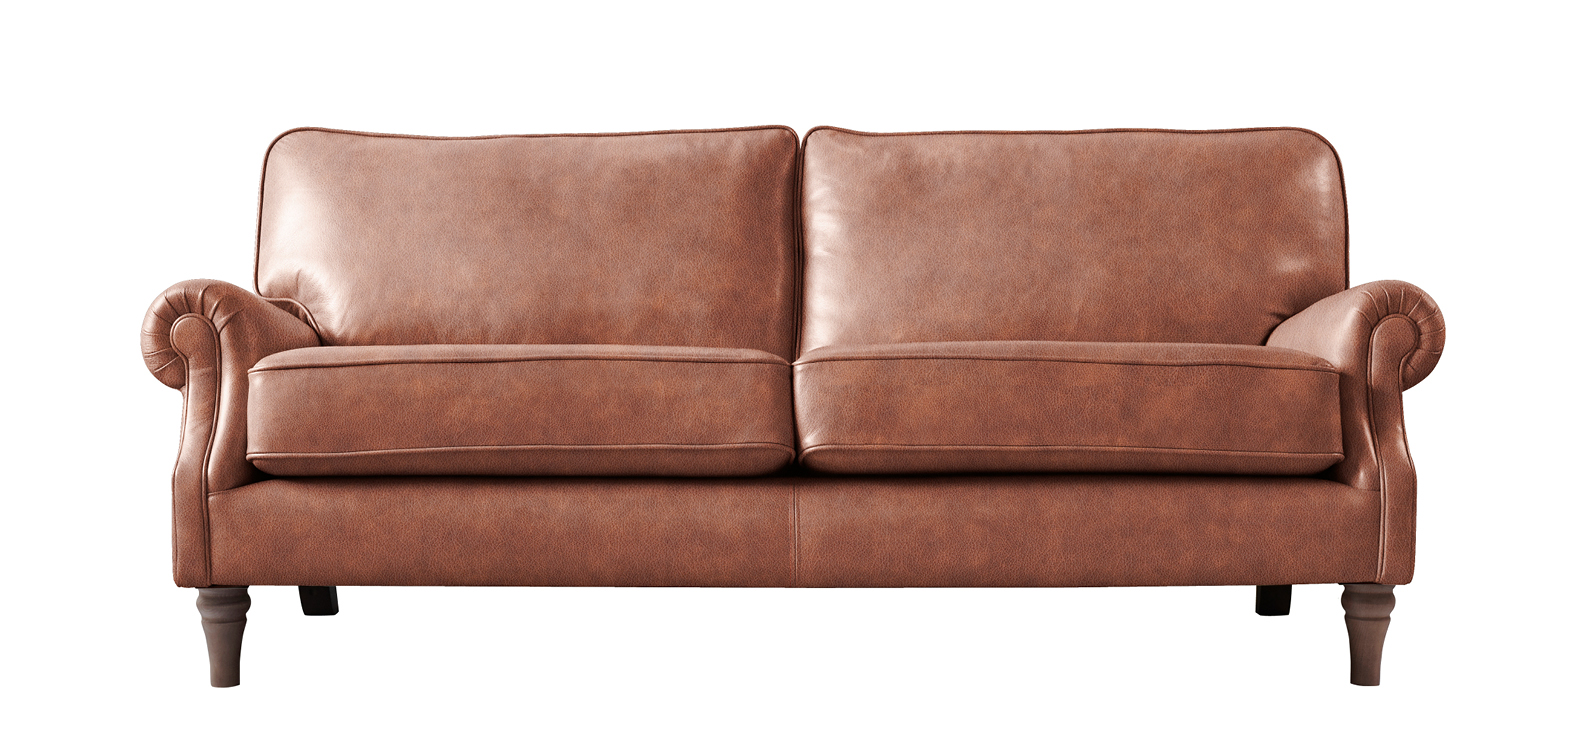 Taylor 3 Seater Leather Sofa